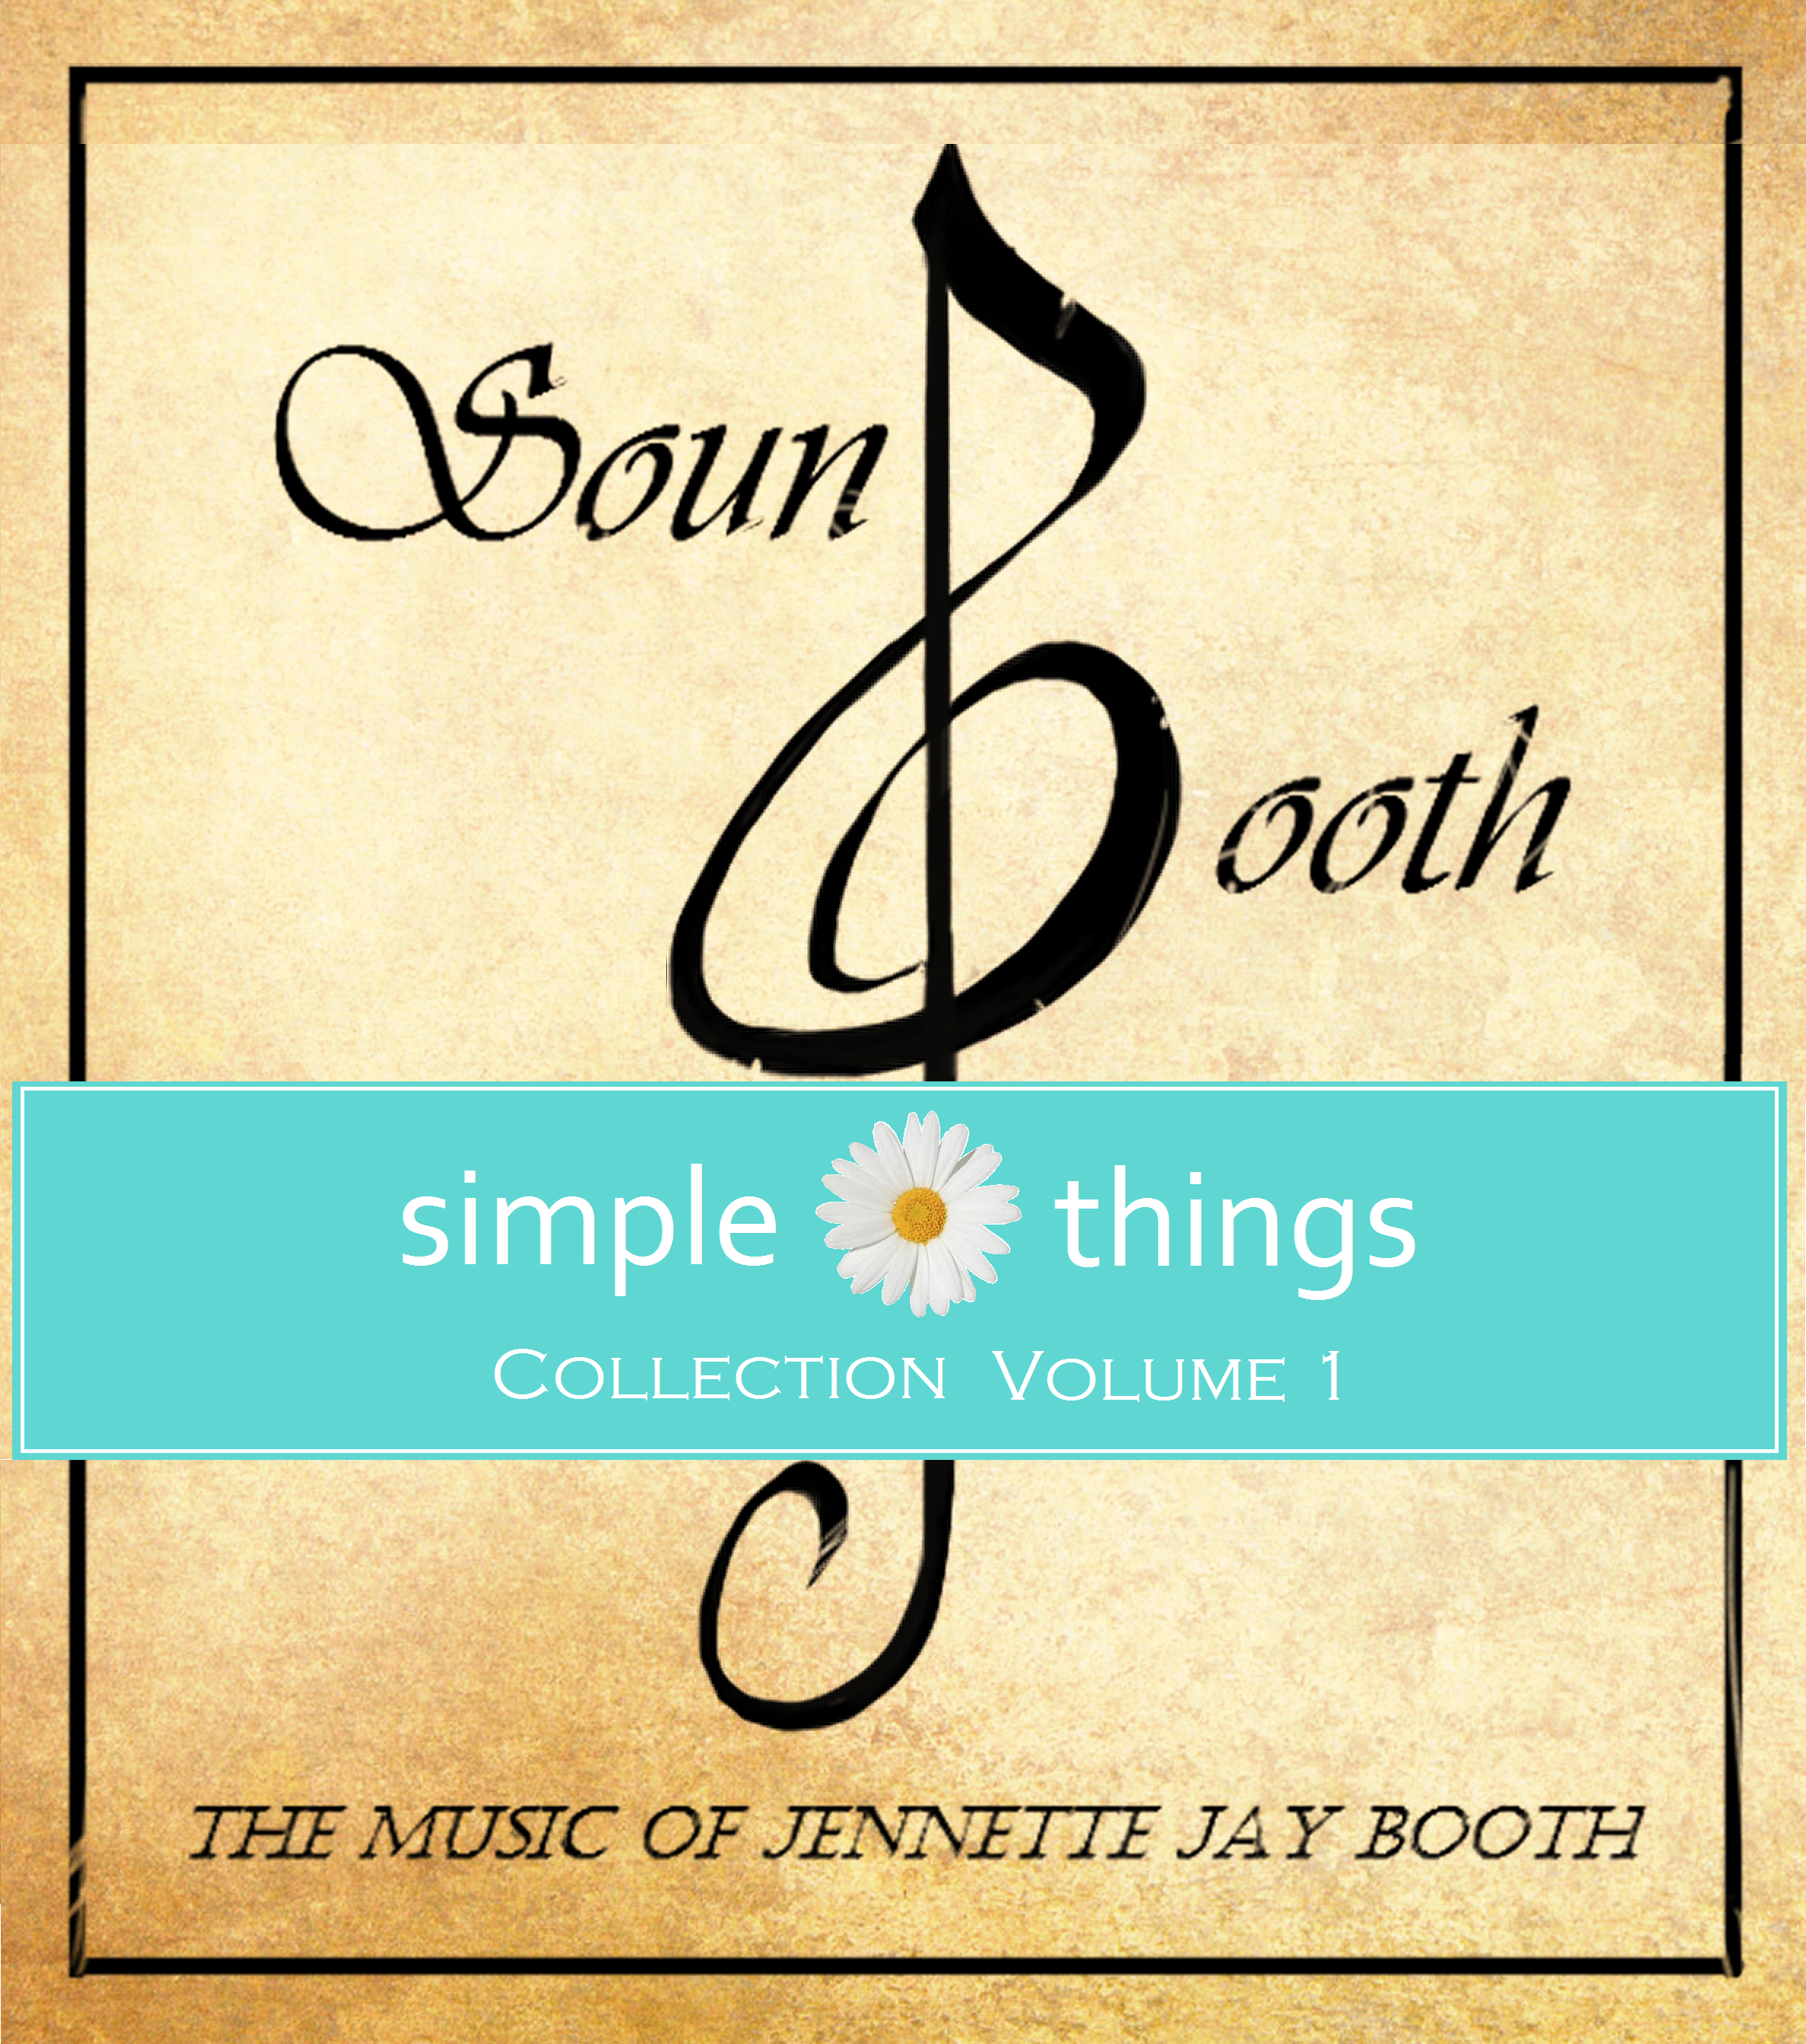 Simple_sound_booth_logo_2